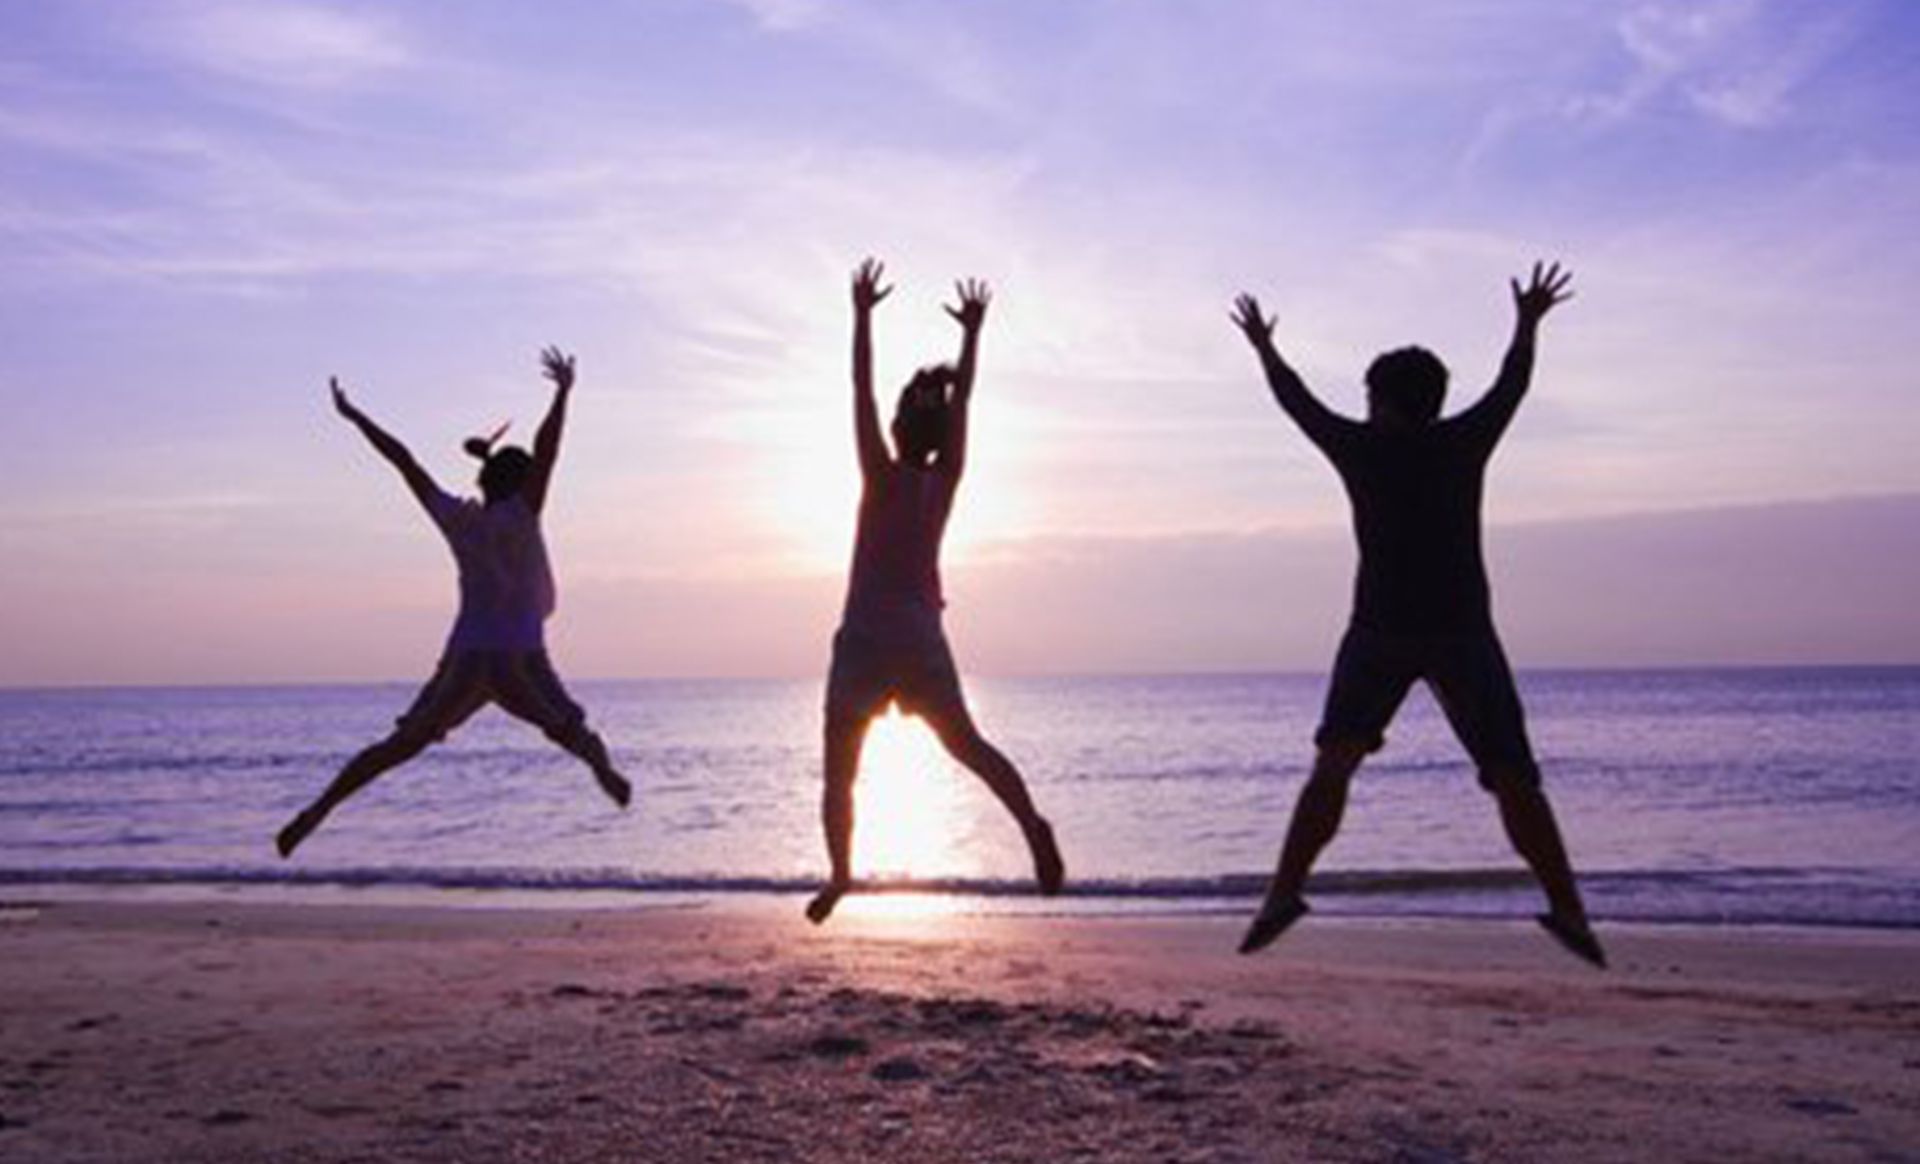 Three silhouetted people jumping on a beach with the sun setting